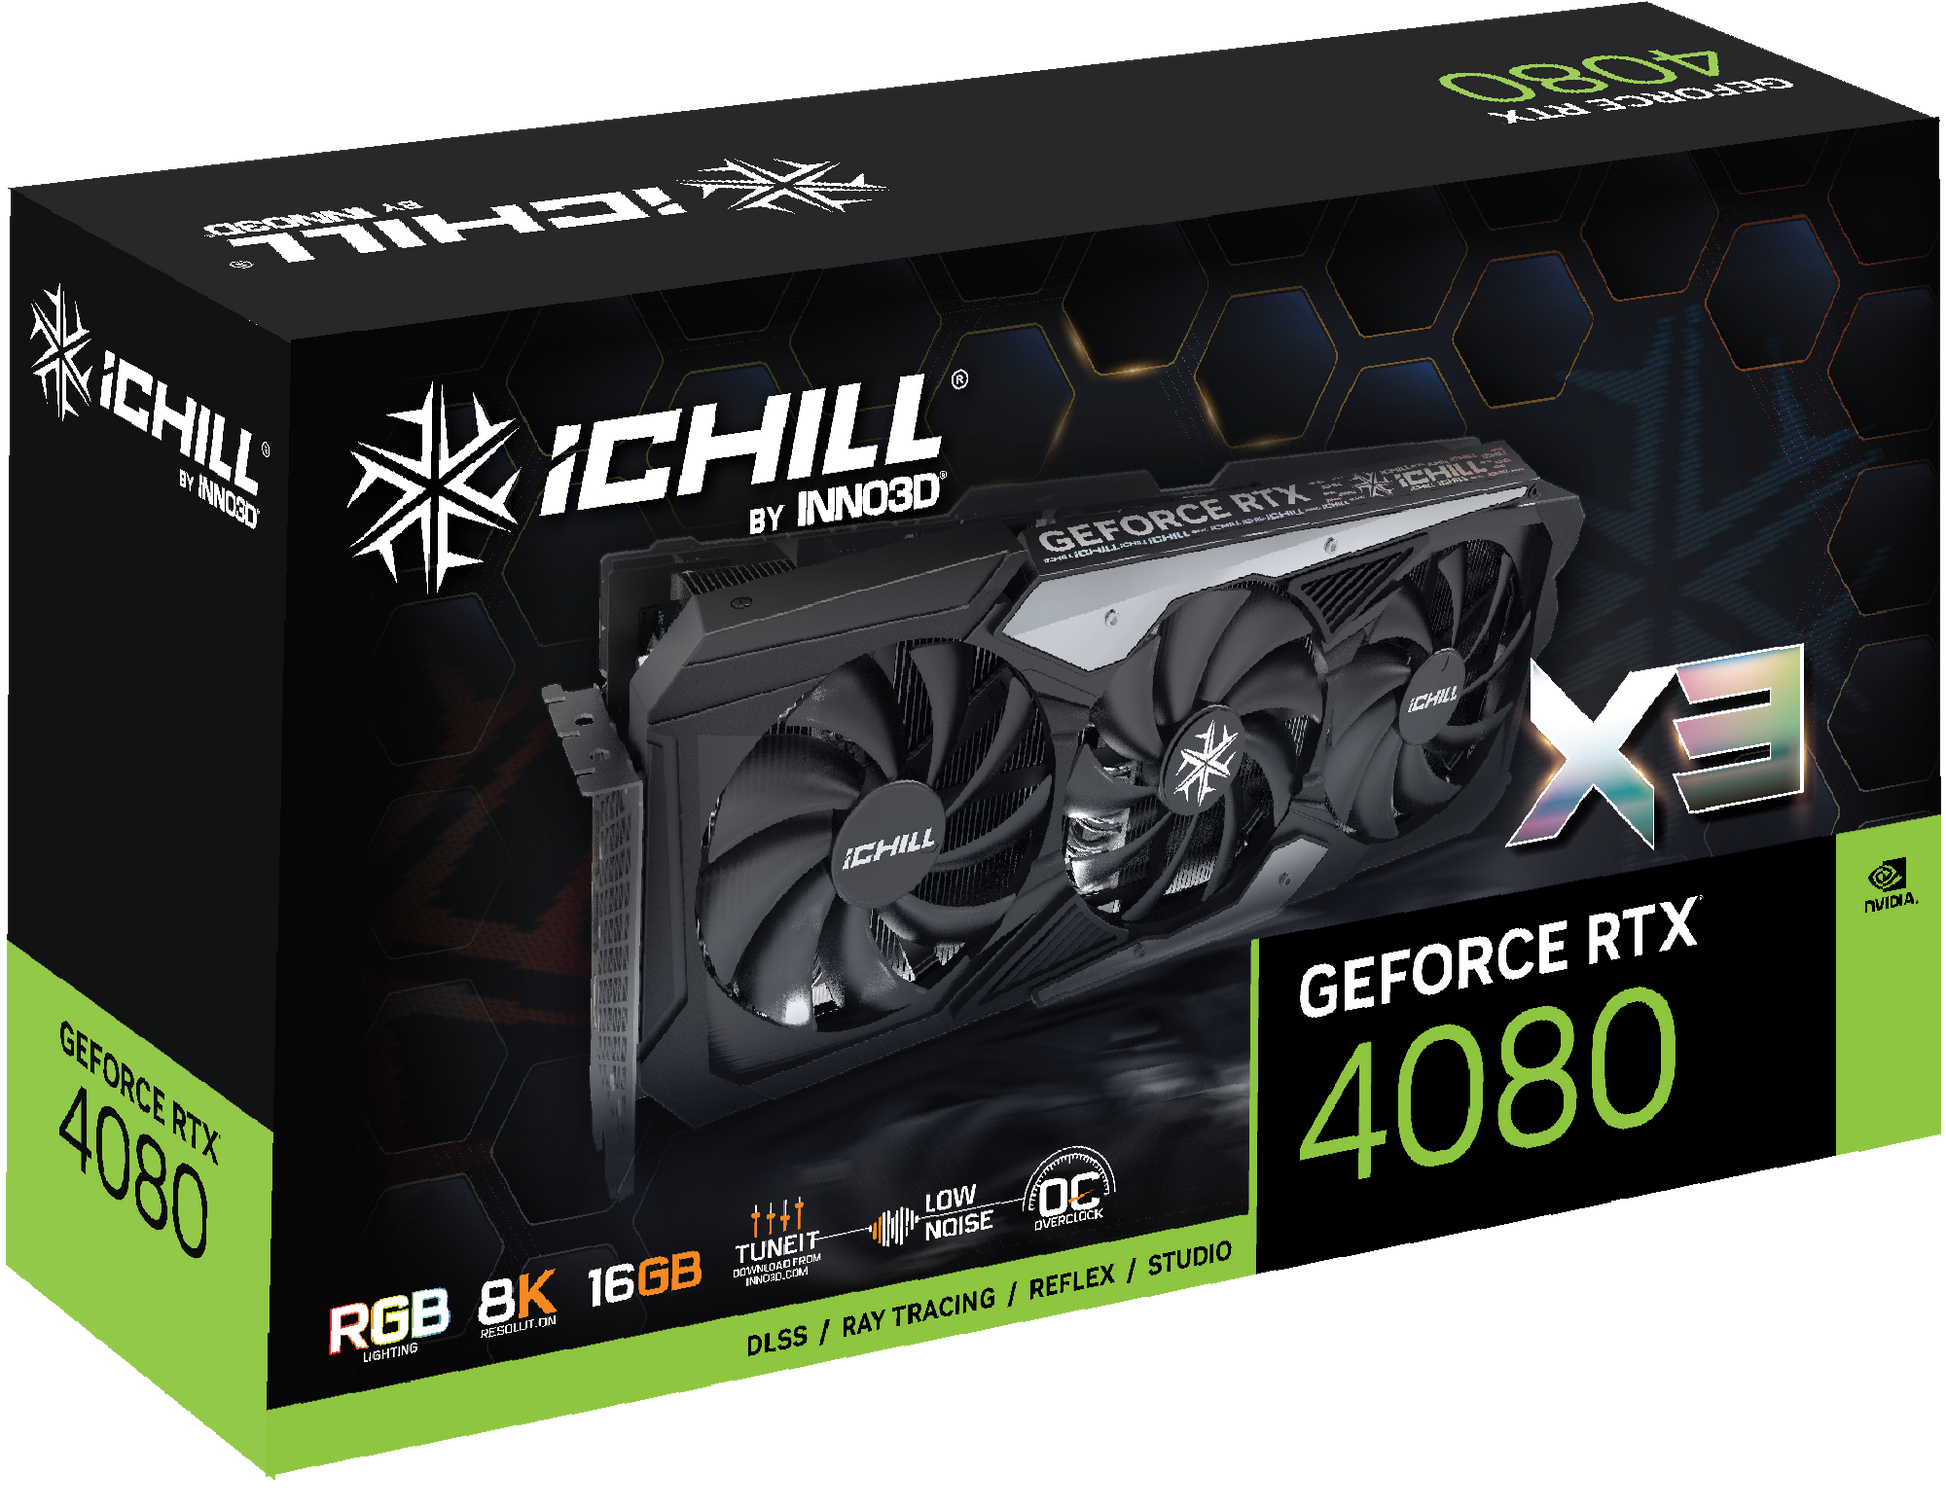 Inno3d Geforce RTX 4080 ICHILL X3 16GB Gaming Graphics Card-GRAPHICS CARD-INNO3D-computerspace